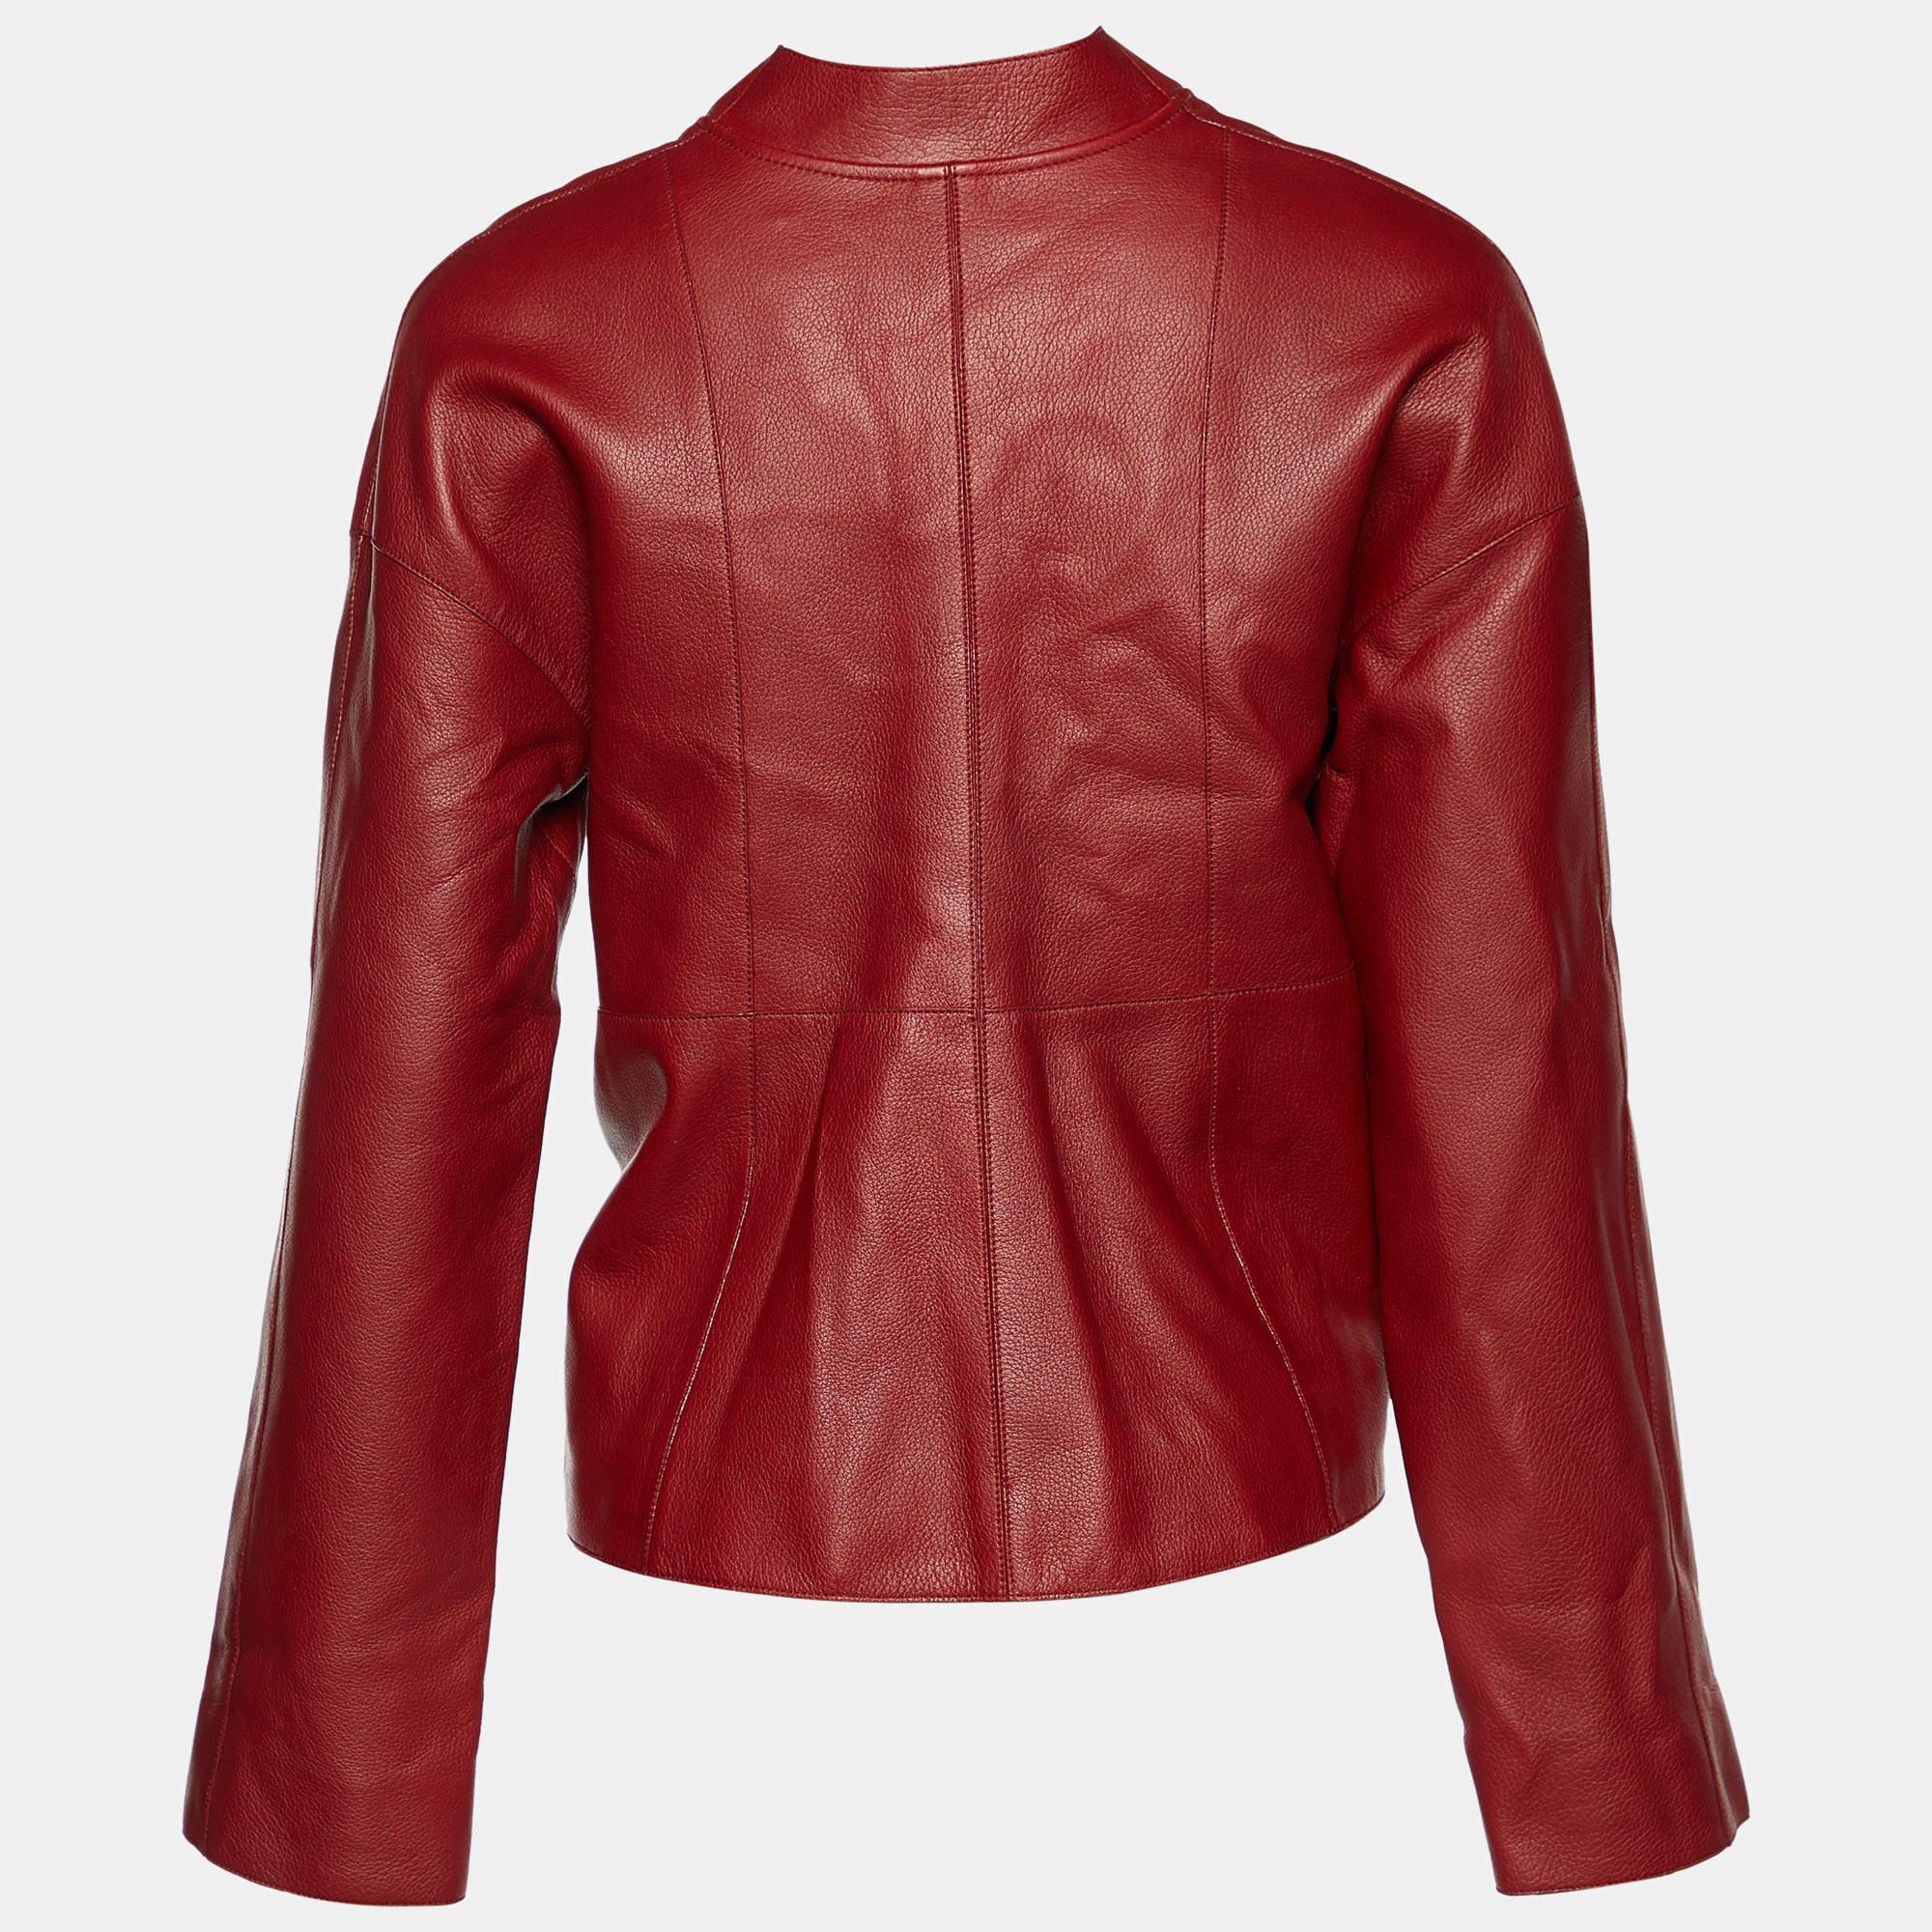 Fashionable and functional, this jacket from Hermes helps you sport a dapper style while wearing it. Tailored using burgundy leather, this Hermes creation flaunts strap detailing on the front and long sleeves. It accommodates two pockets. Elevate